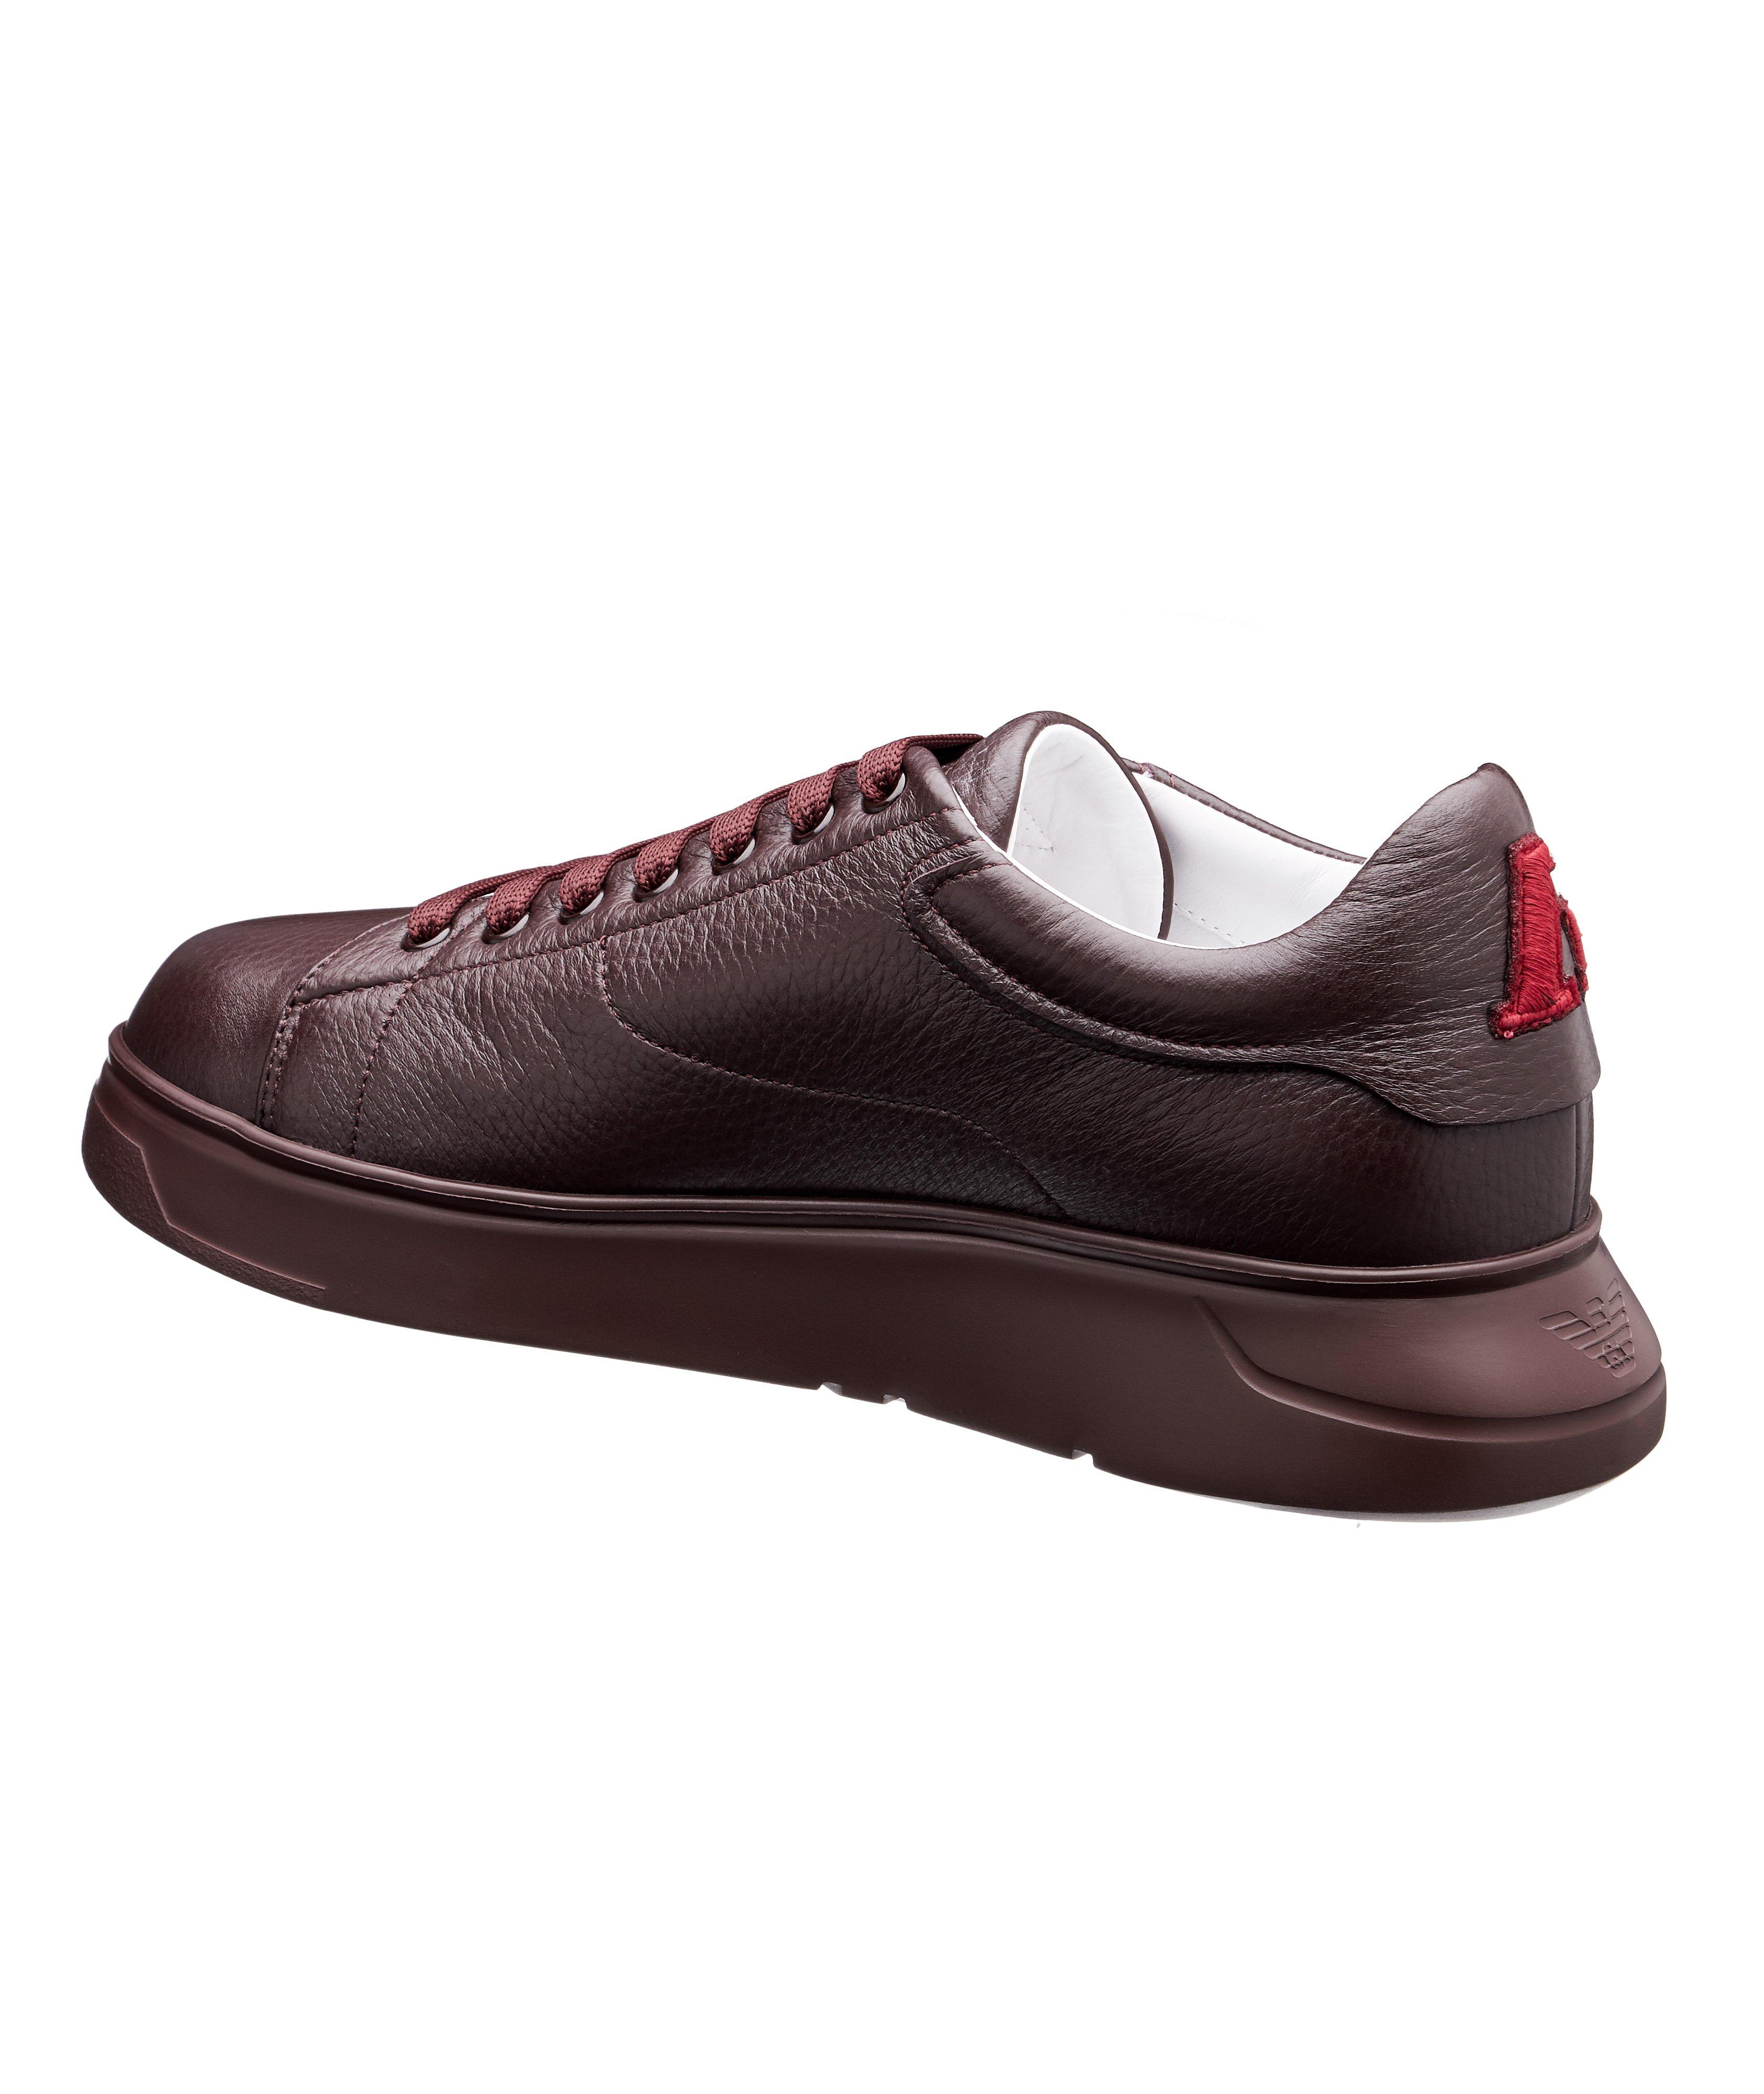 Leather Sneakers image 1